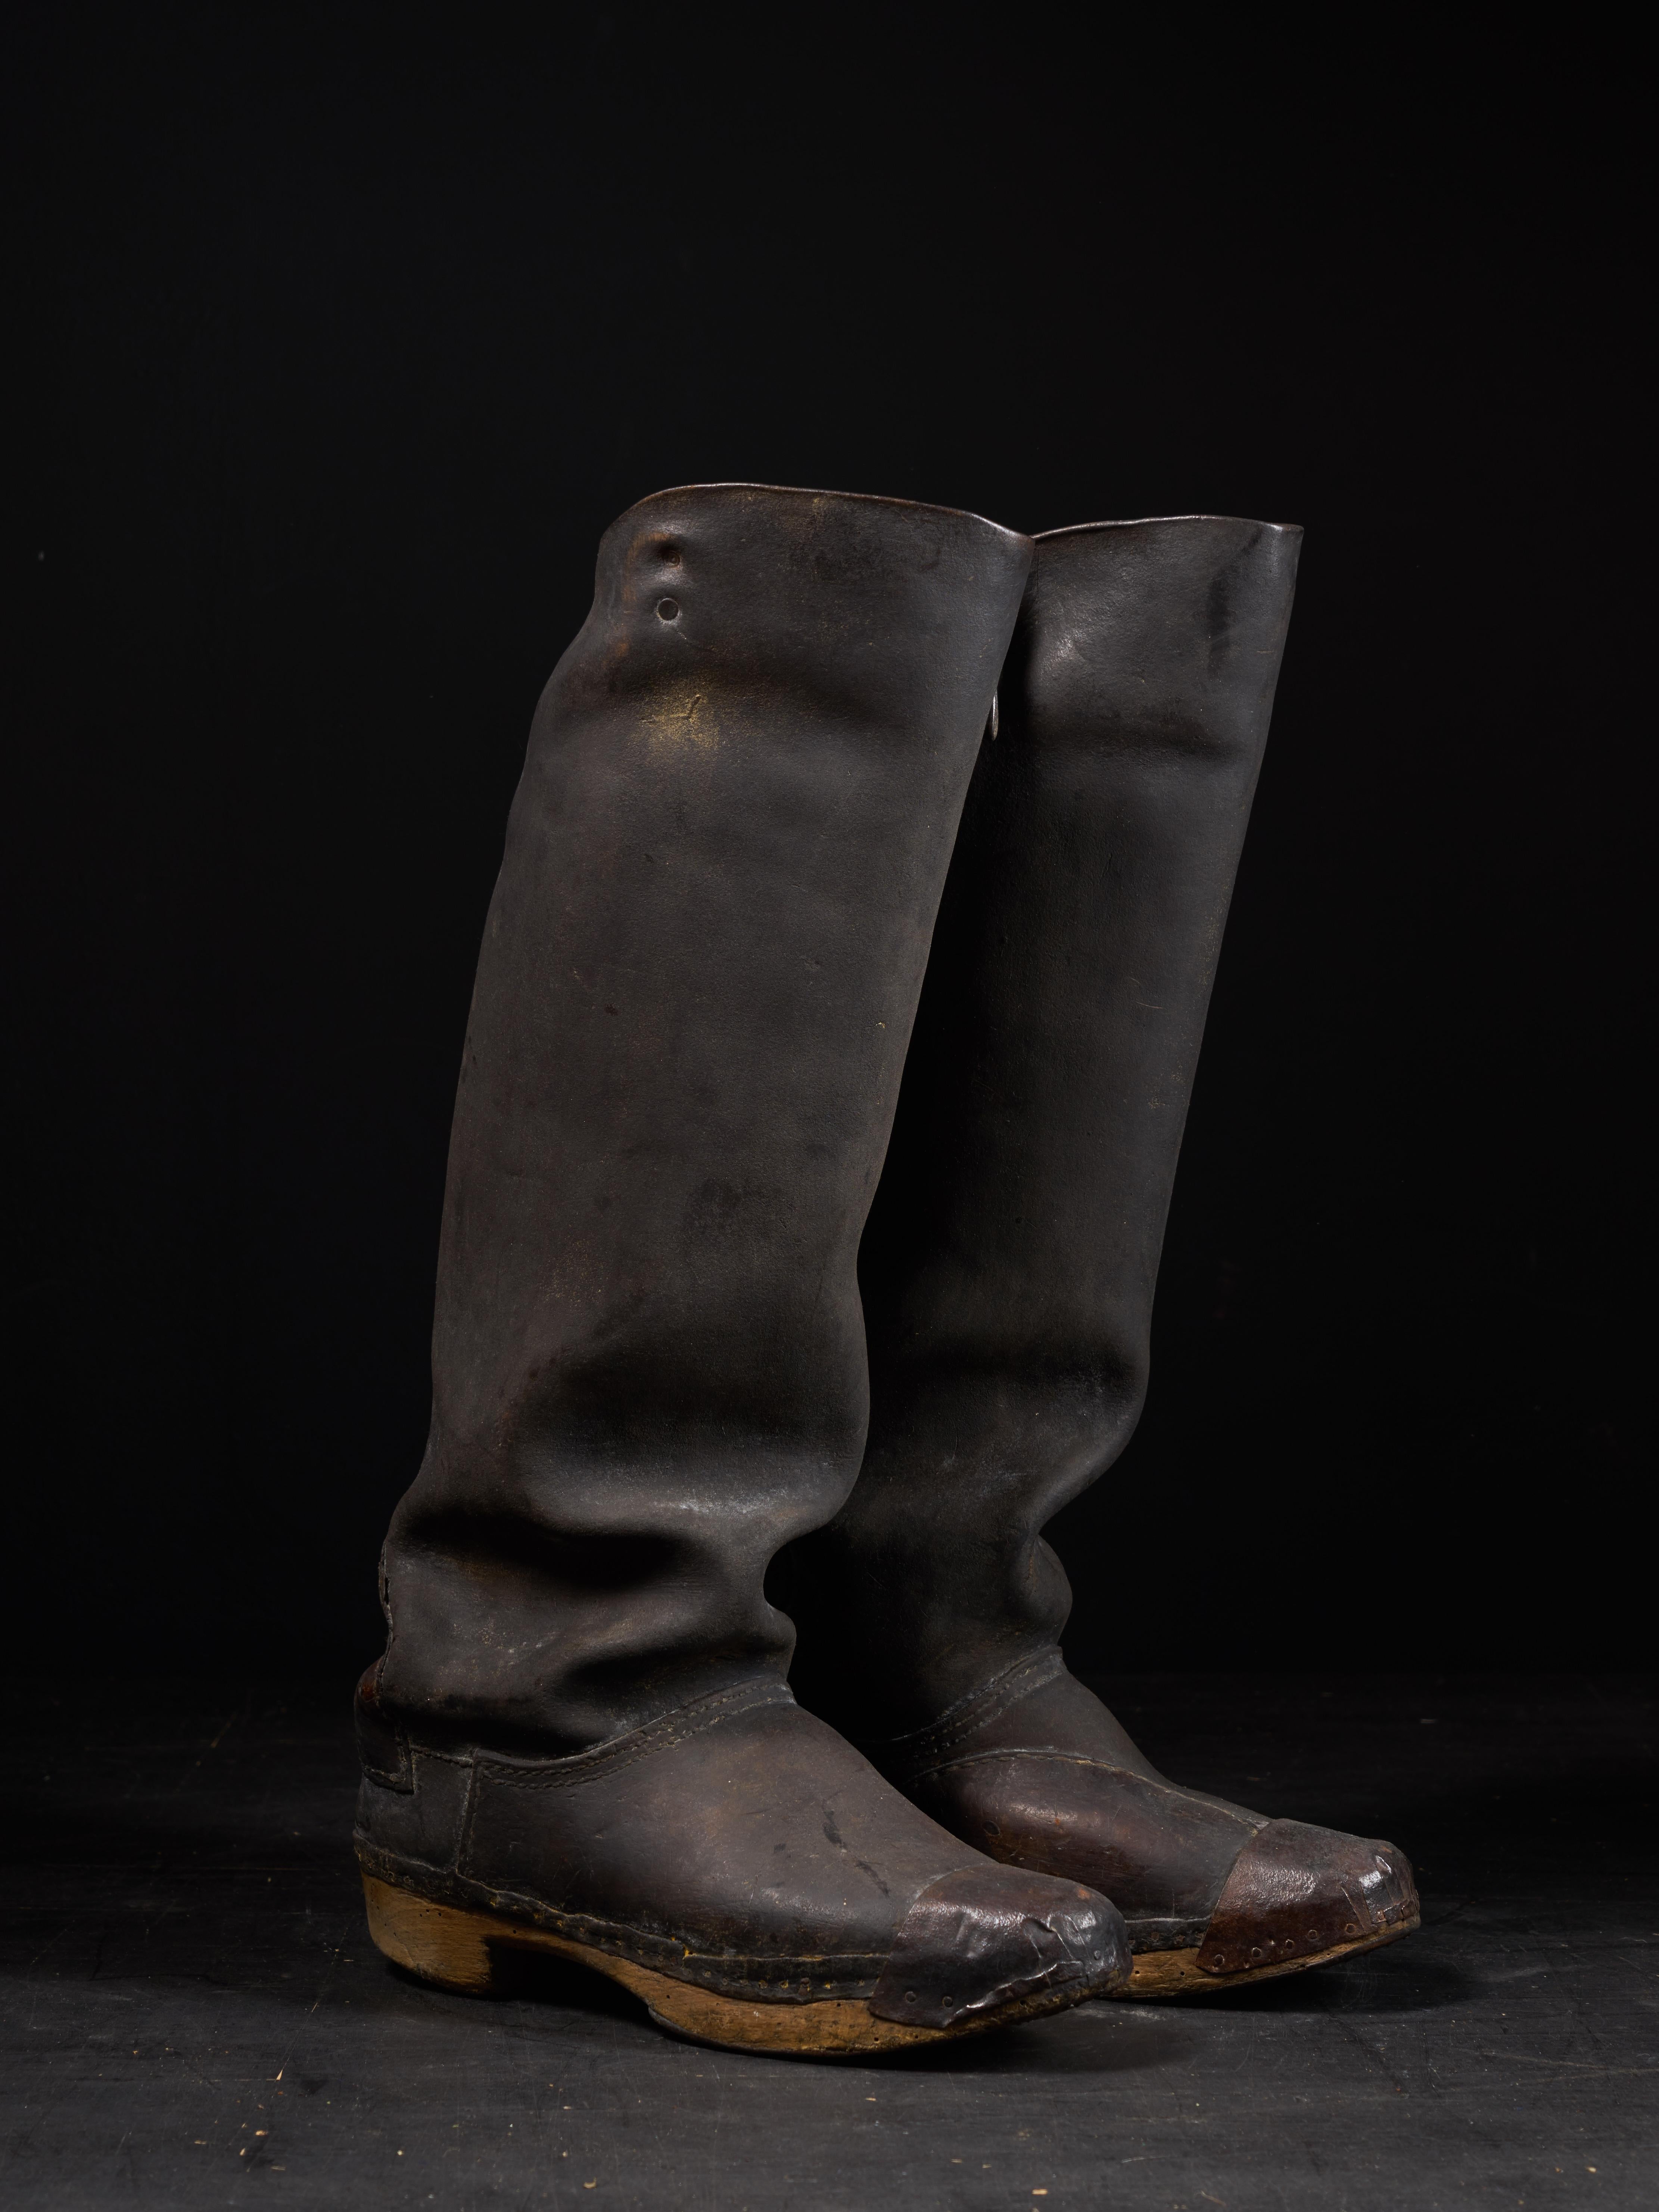 These are a pair of black leather high rise boots from the first half of the 20th century. It is plausible these were riding boots worn by men during the hunt or during a horseback riding trip as leisure.